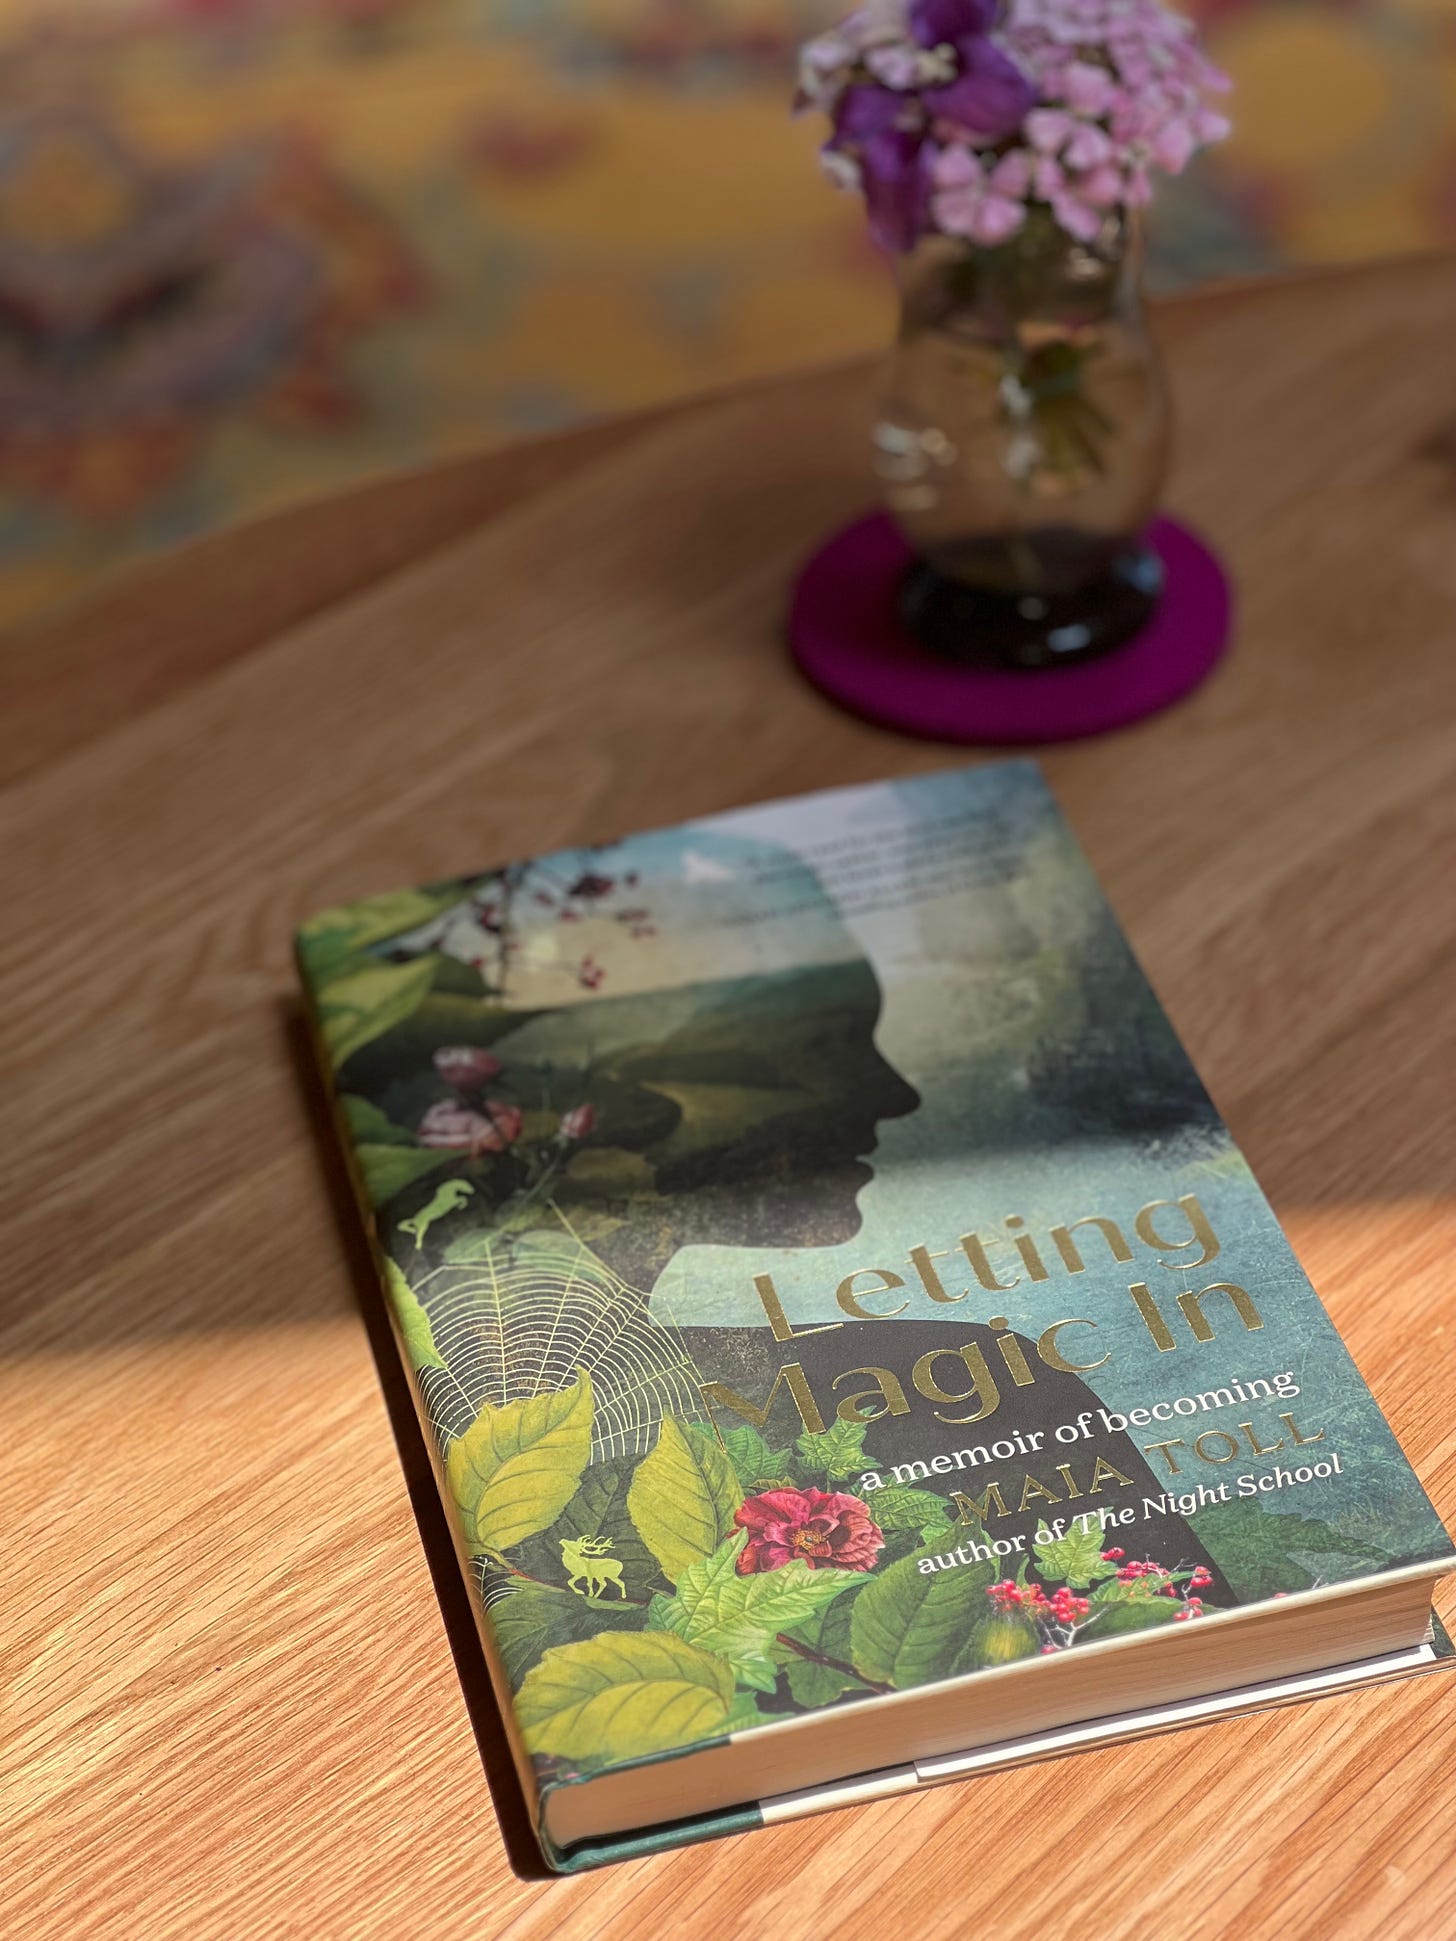 Copy of Letting Magic In book on a coffee table next to purple flowers